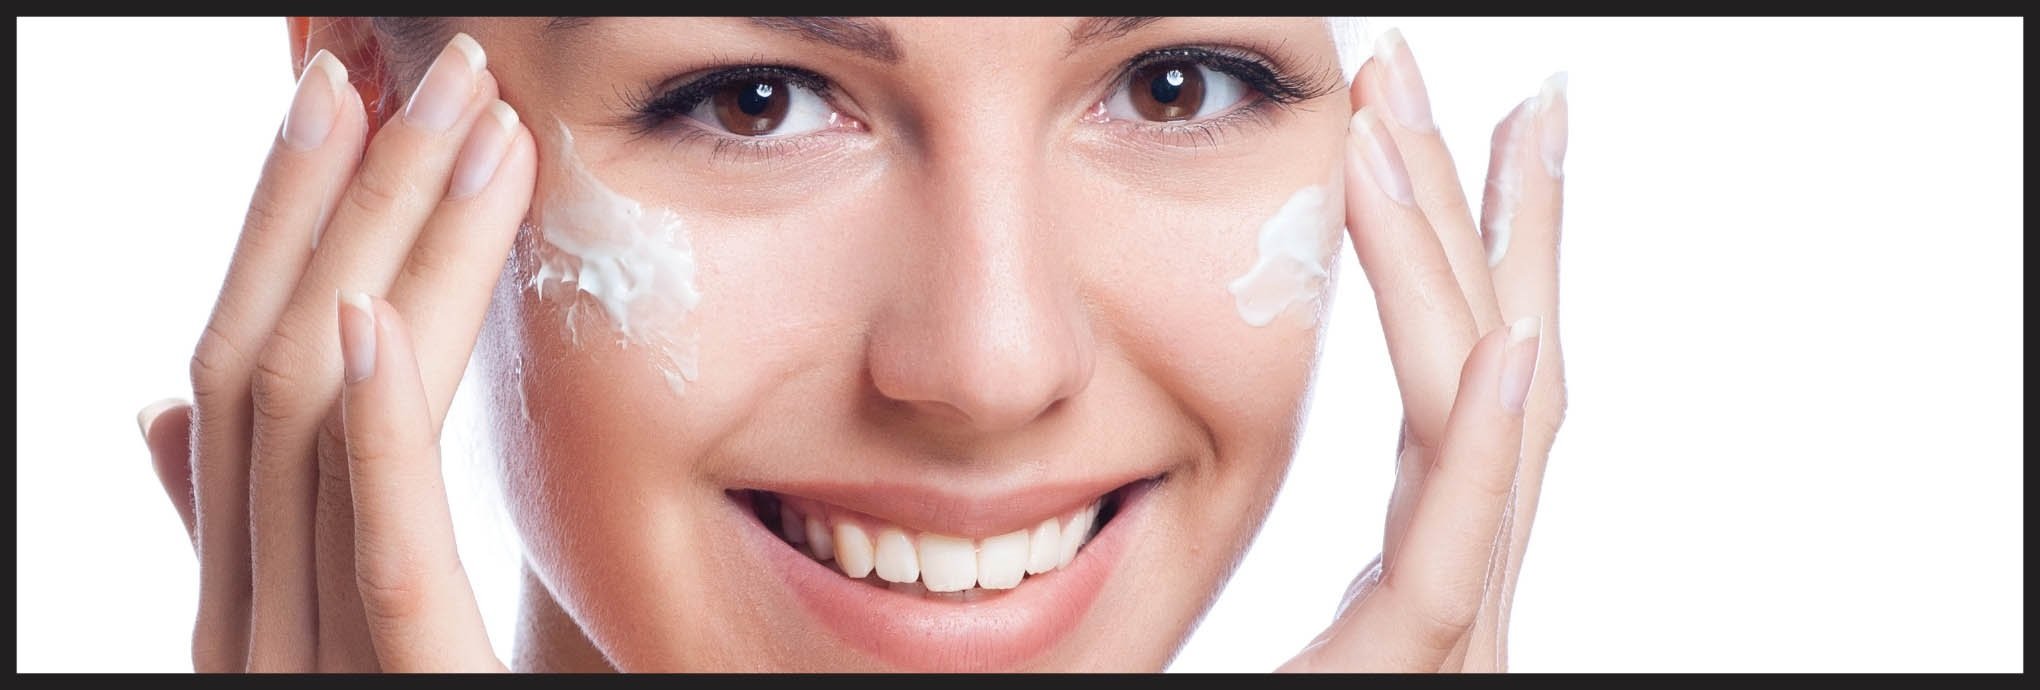 woman-admiring-the-effects-of-new-skin-care-tools-on-smooth-face